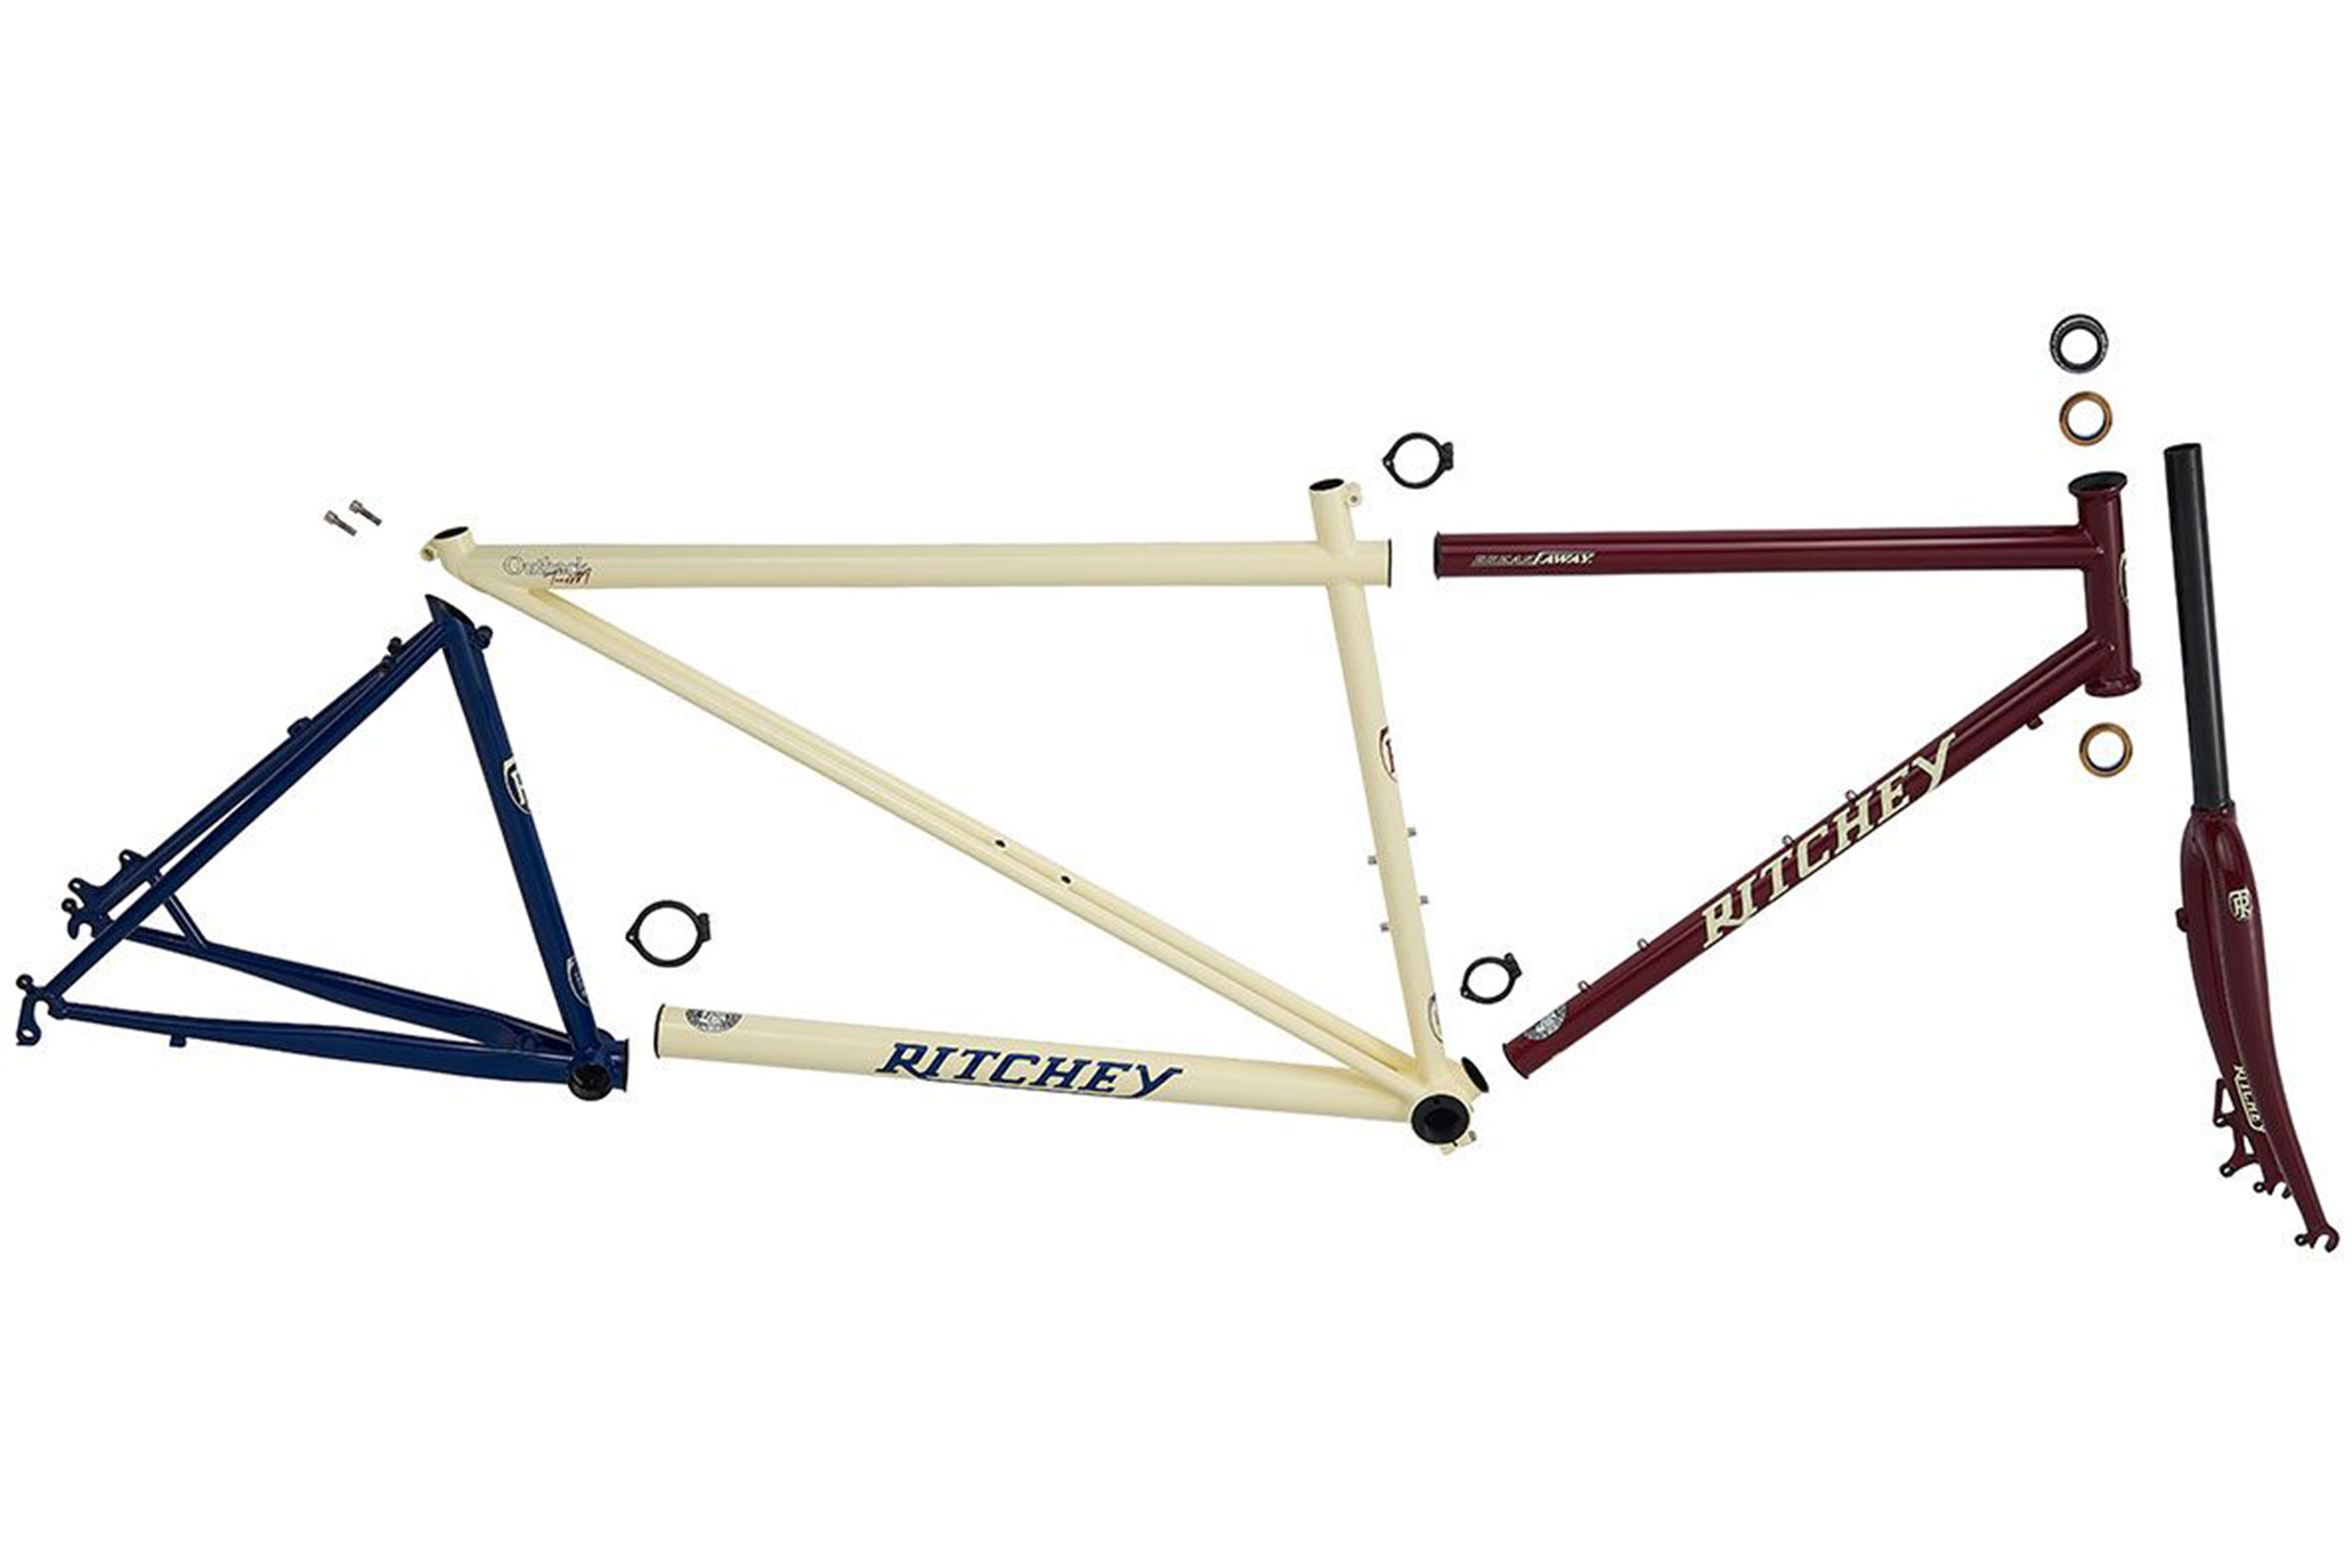 Ritchey Outback Tandm